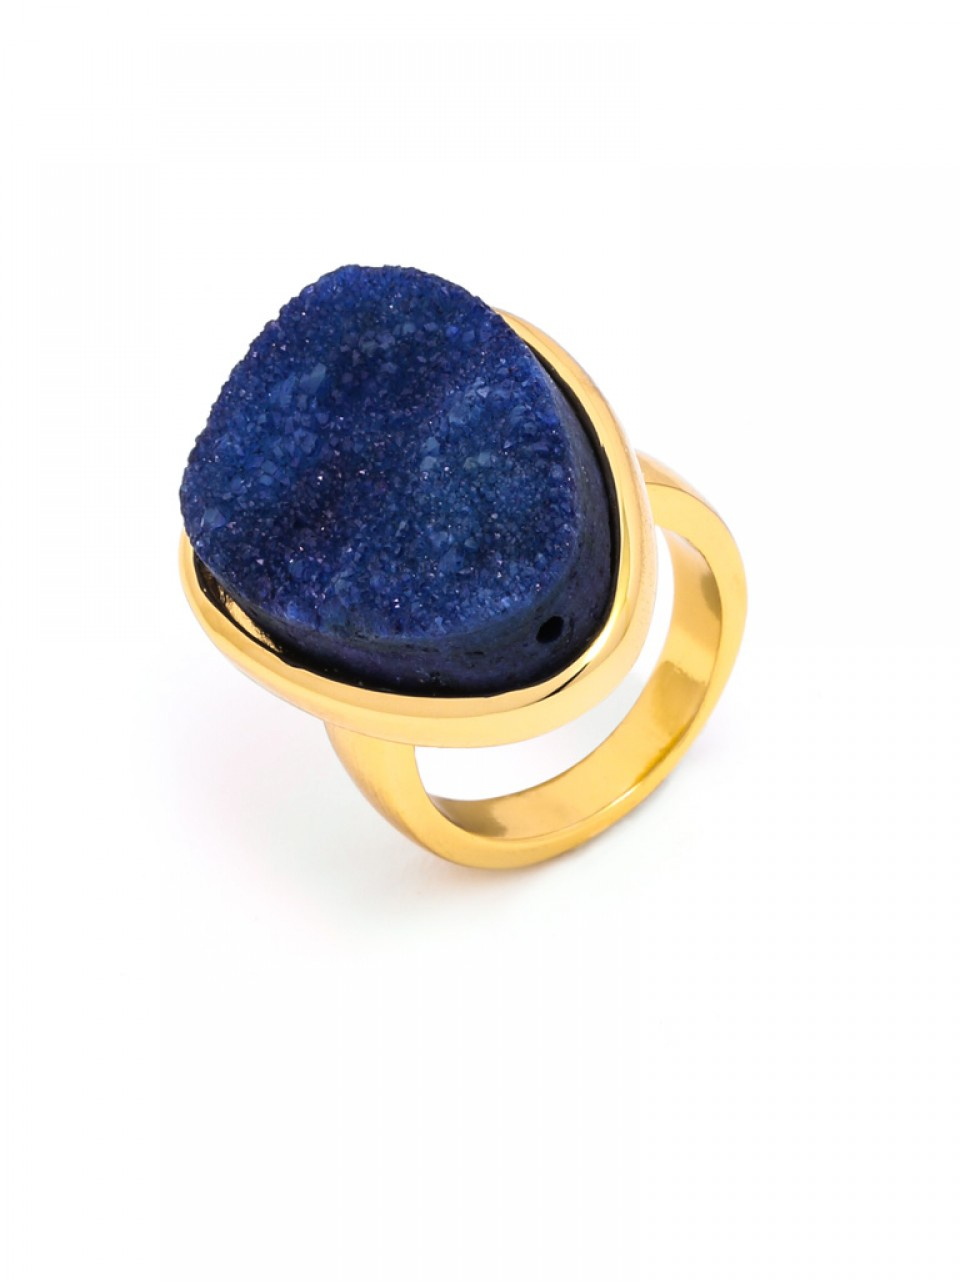 baublebar-druzy-cocktail-ring-product-0-810224442-normal.jpeg